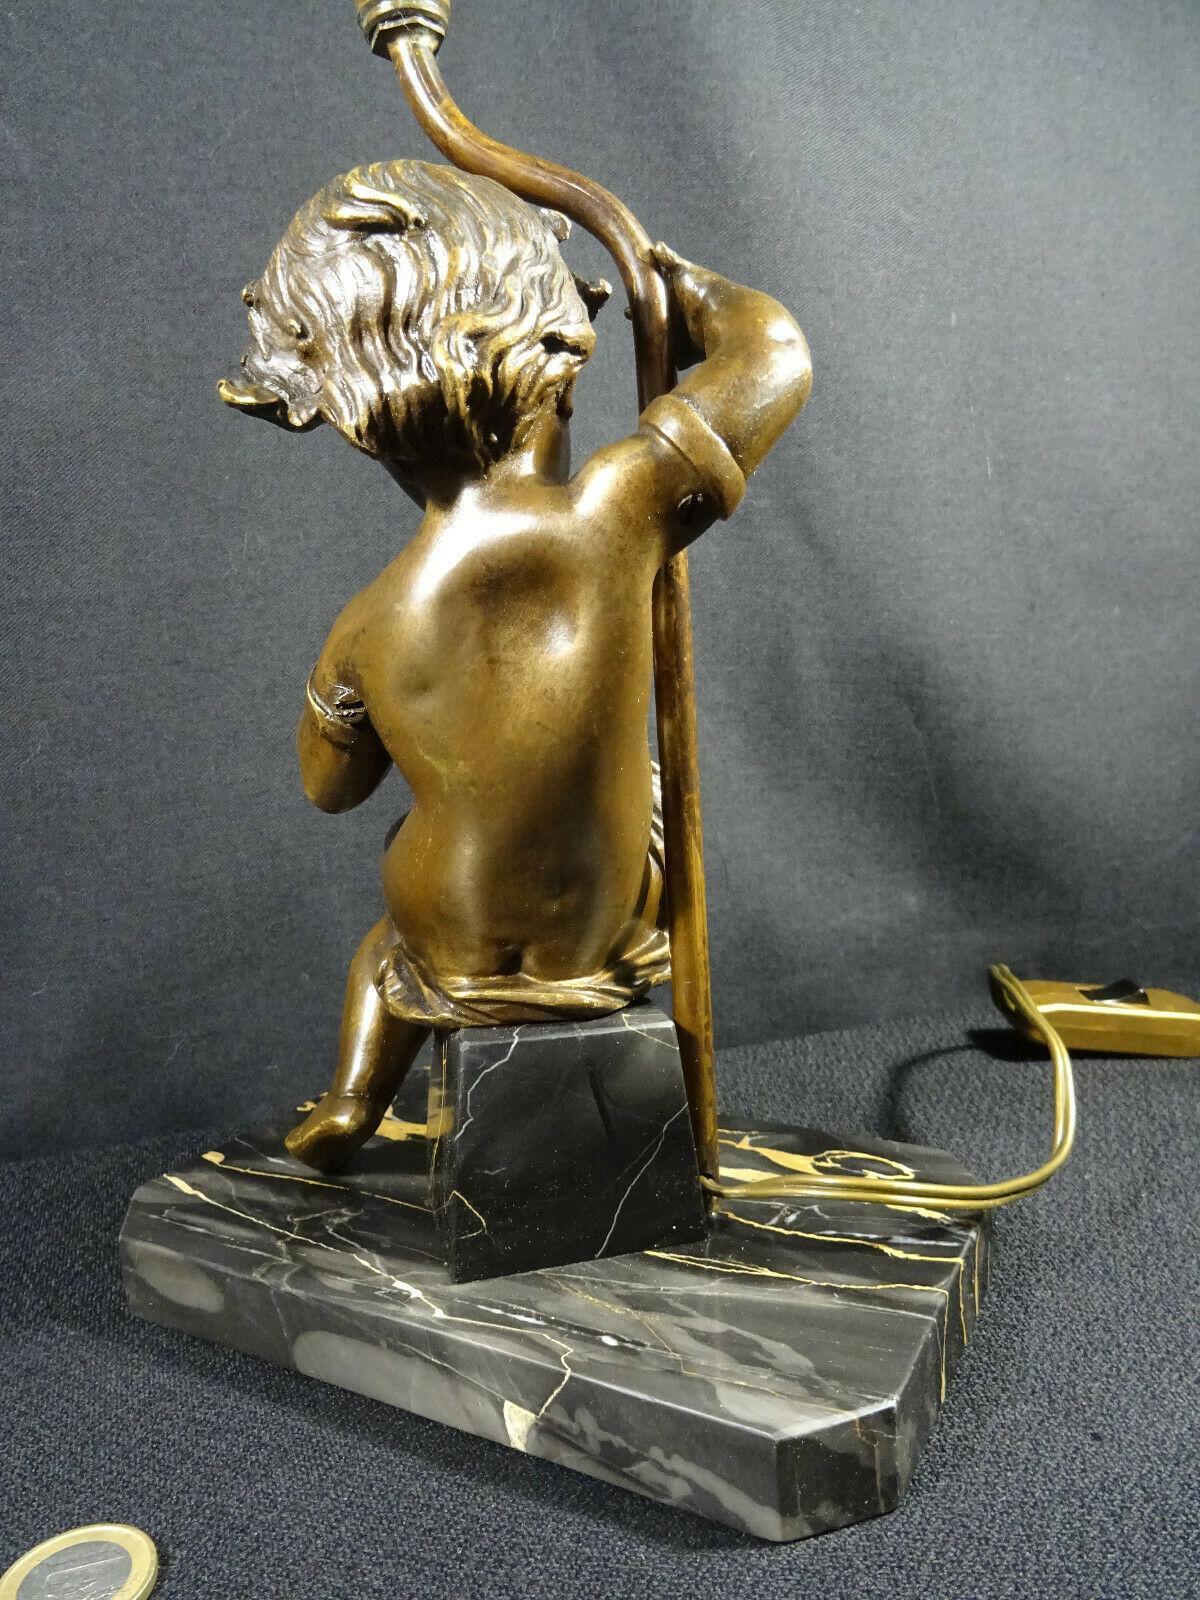 Mid-19th Century 19thc French Antique Louis XV style Bronze Cherub Figural Table Lamp on Marble For Sale